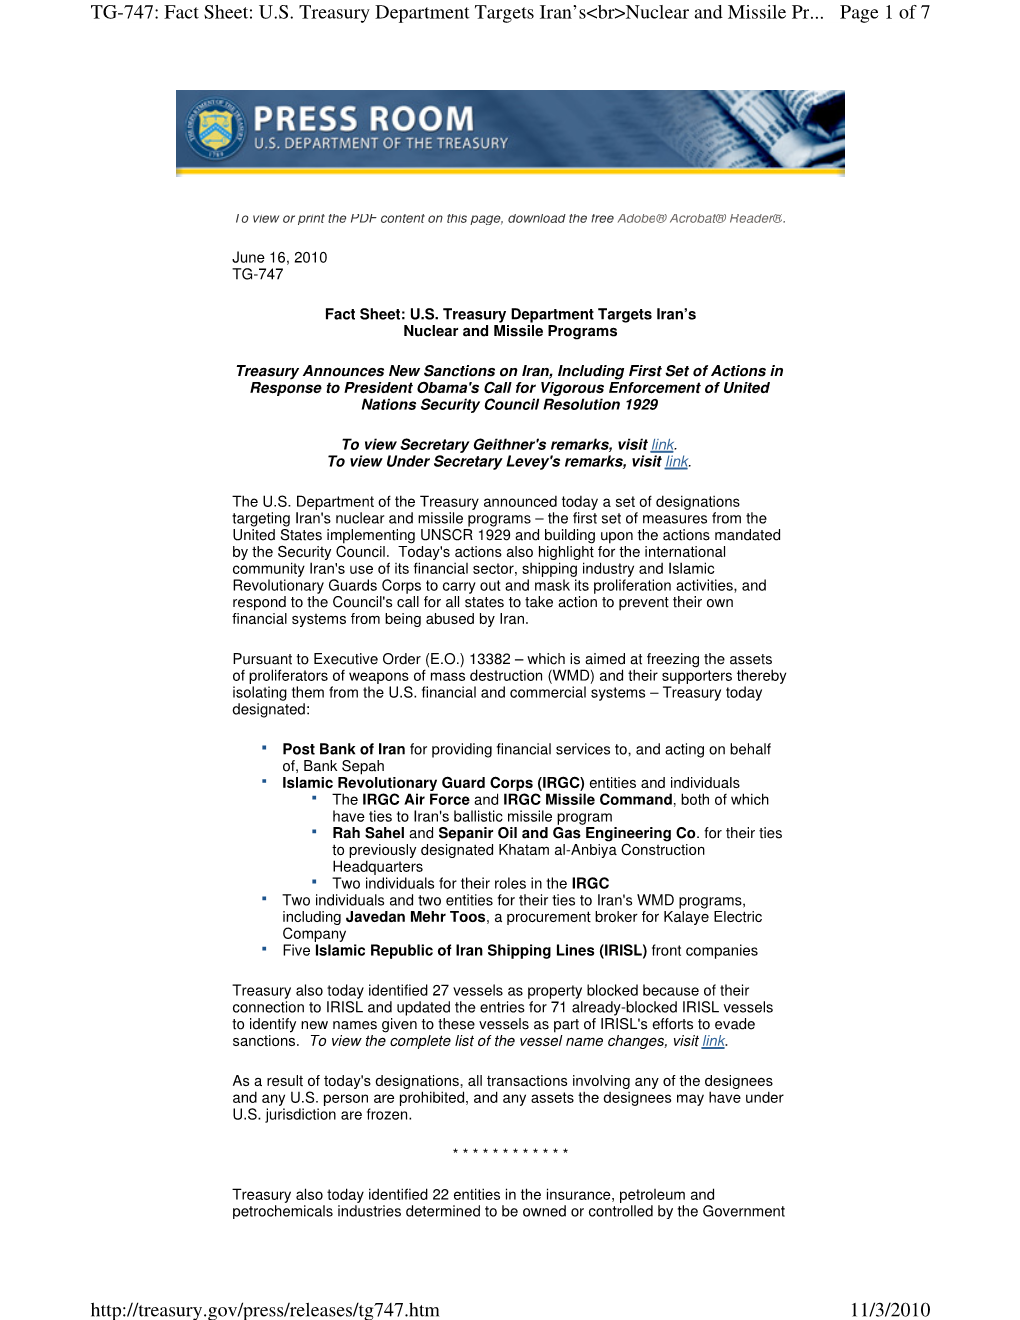 Page 1 of 7 TG-747: Fact Sheet: U.S. Treasury Department Targets